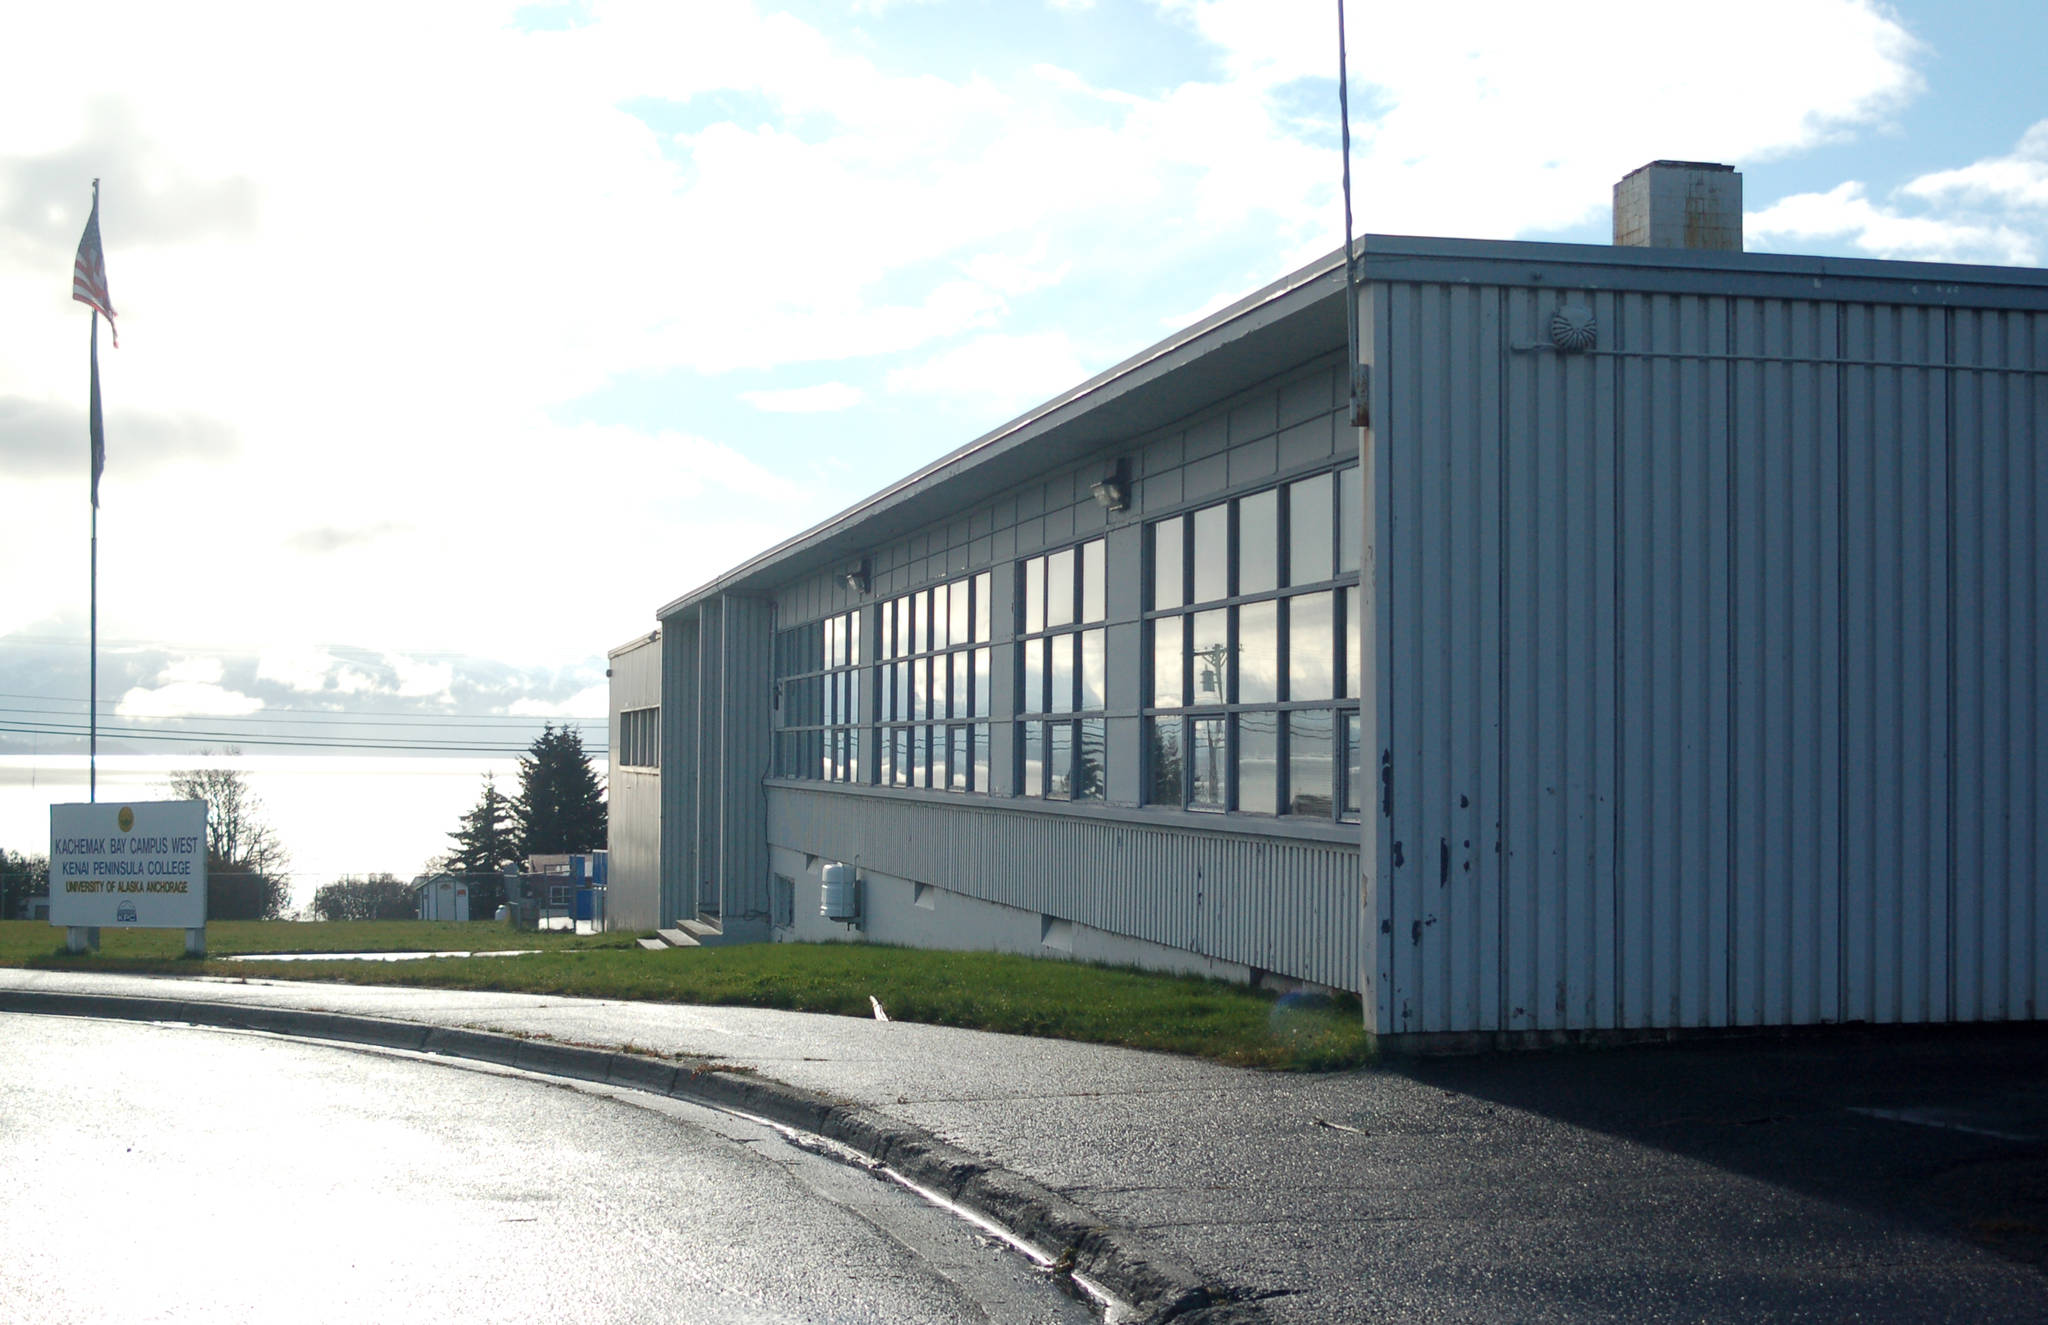 The HERC Building as seen in a 2010 file photo from the upper parking lot at Woodside Avenue. At the time the Kachemak Bay Campus used the building as temporary office and classroom space while the Pioneer Avenue building was being remodeled, one of several uses of the HERC since the city acquired it from the Kenai Peninsula Borough in 2000. (Homer News file photo)